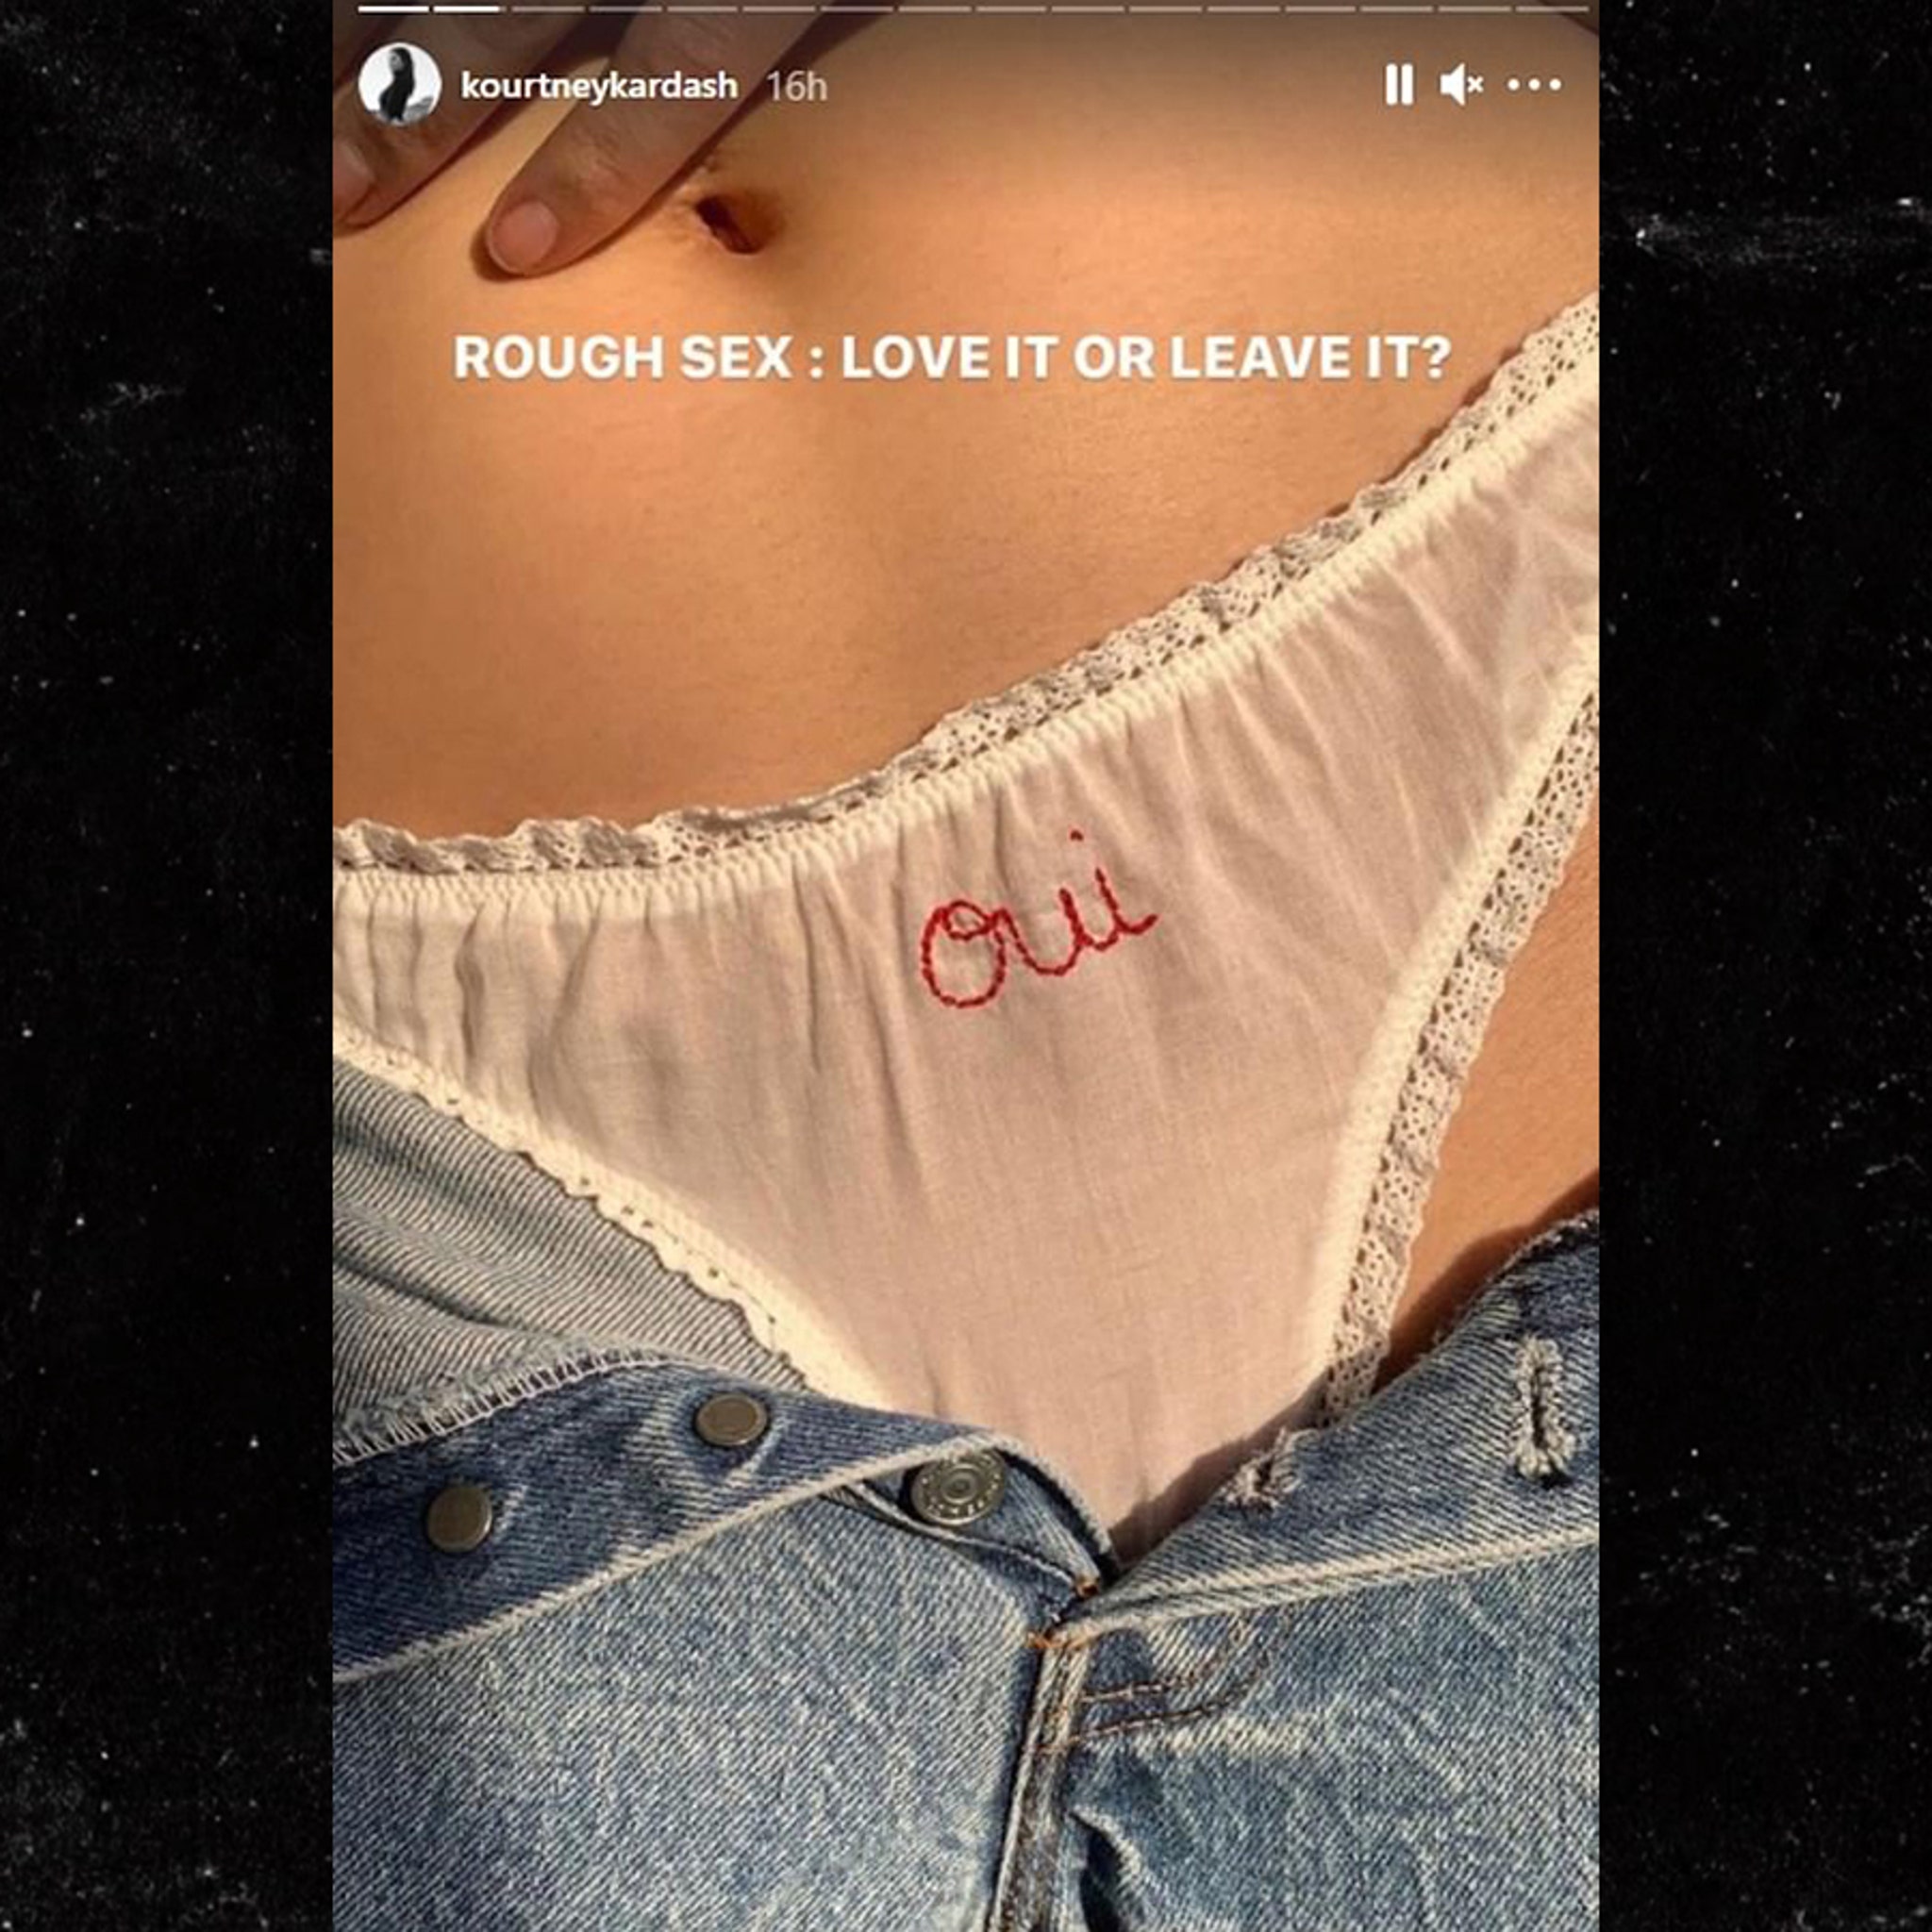 Kourtney K Hits Followers with Rough Sex Poll and Oui Panties